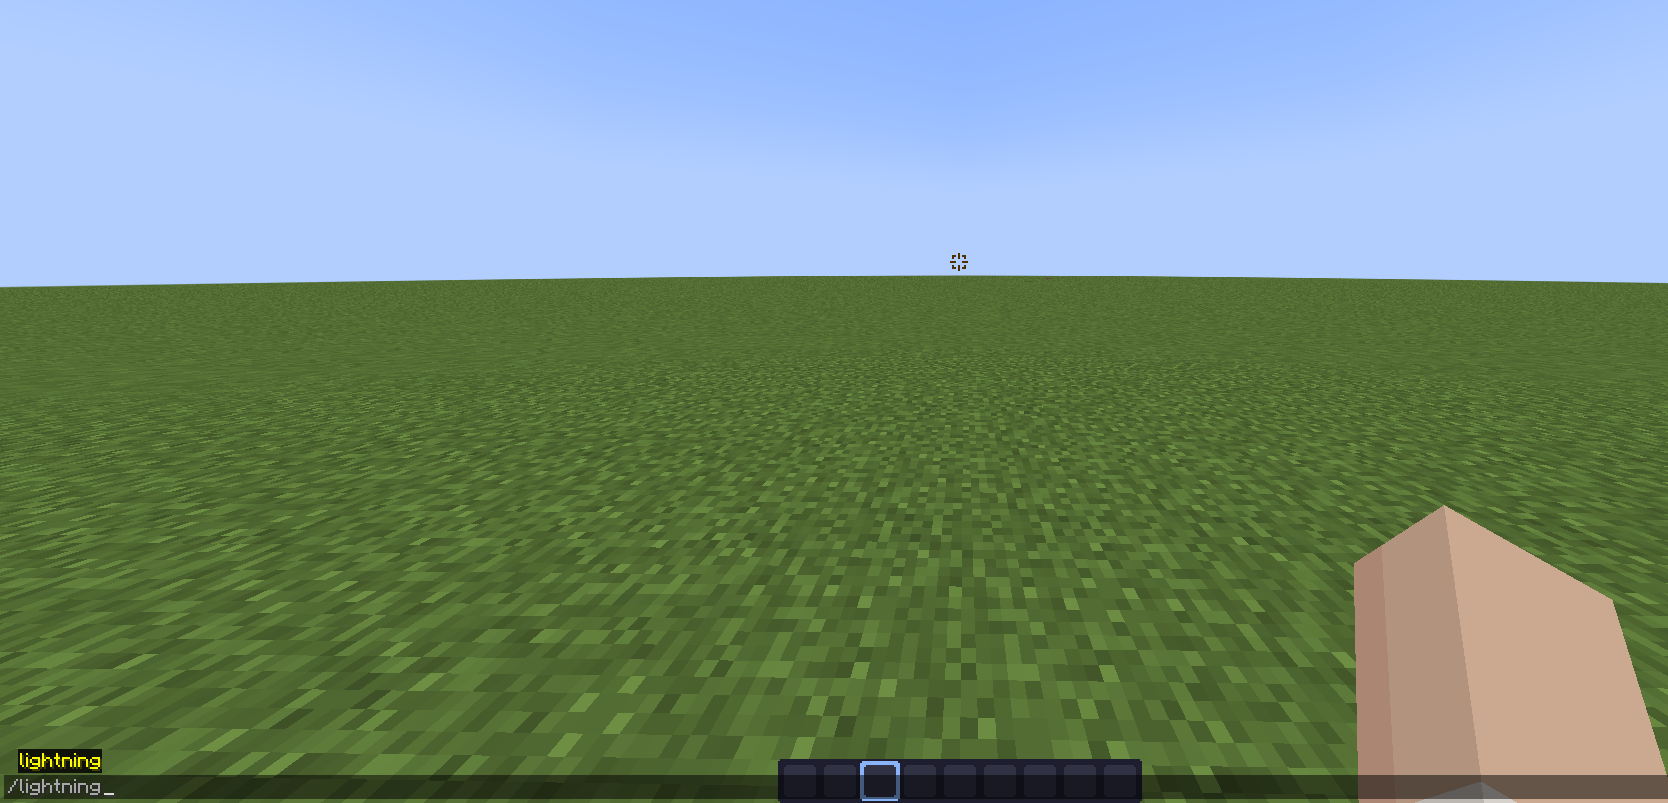 in minecraft showing the command /lightning